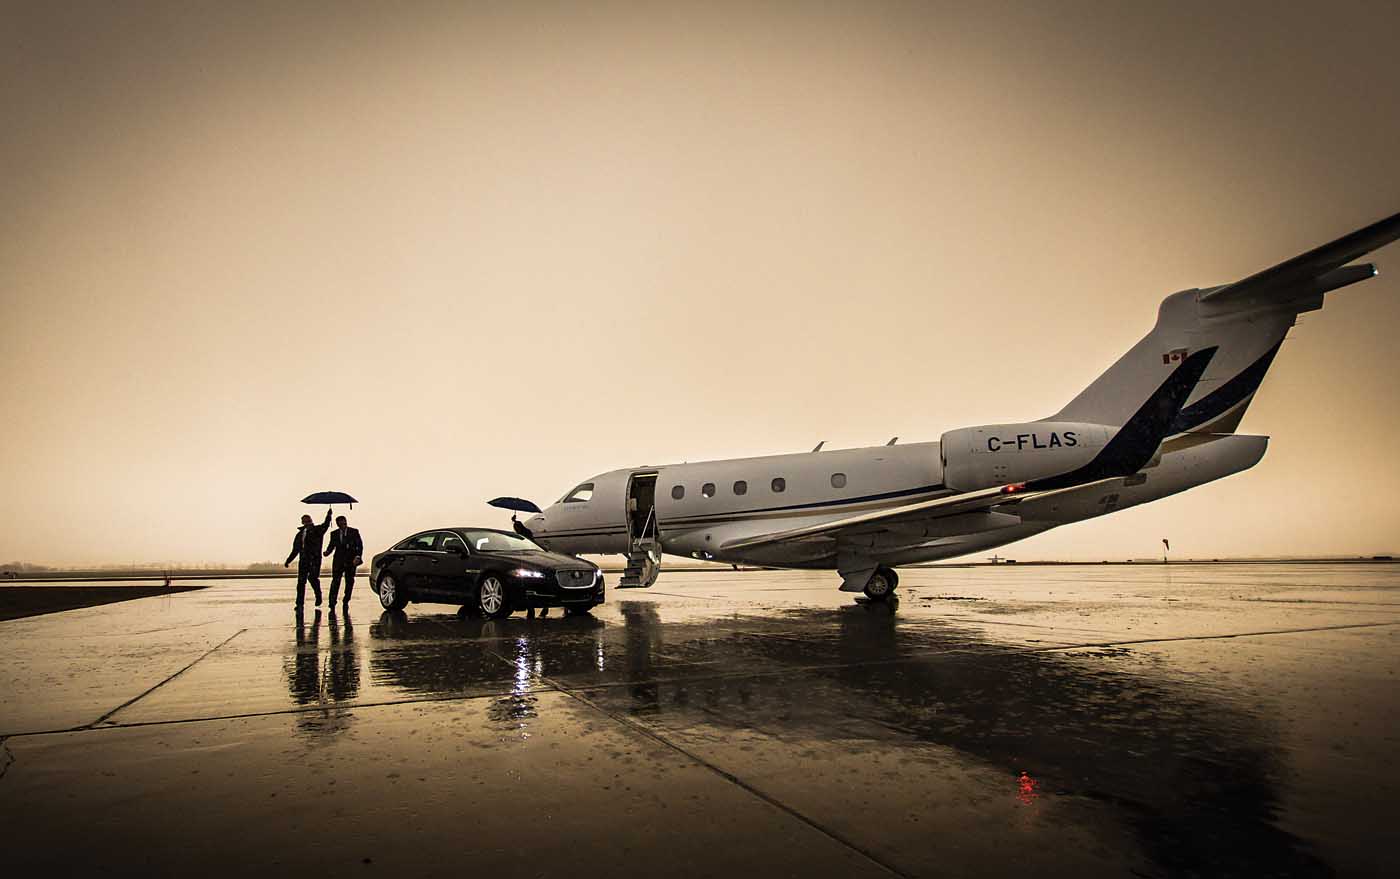 AirSpring caters to successful Canadians, but also brings the benefits of private aviation to exponentially more people through the fractional model. Adriana Bernal Photo